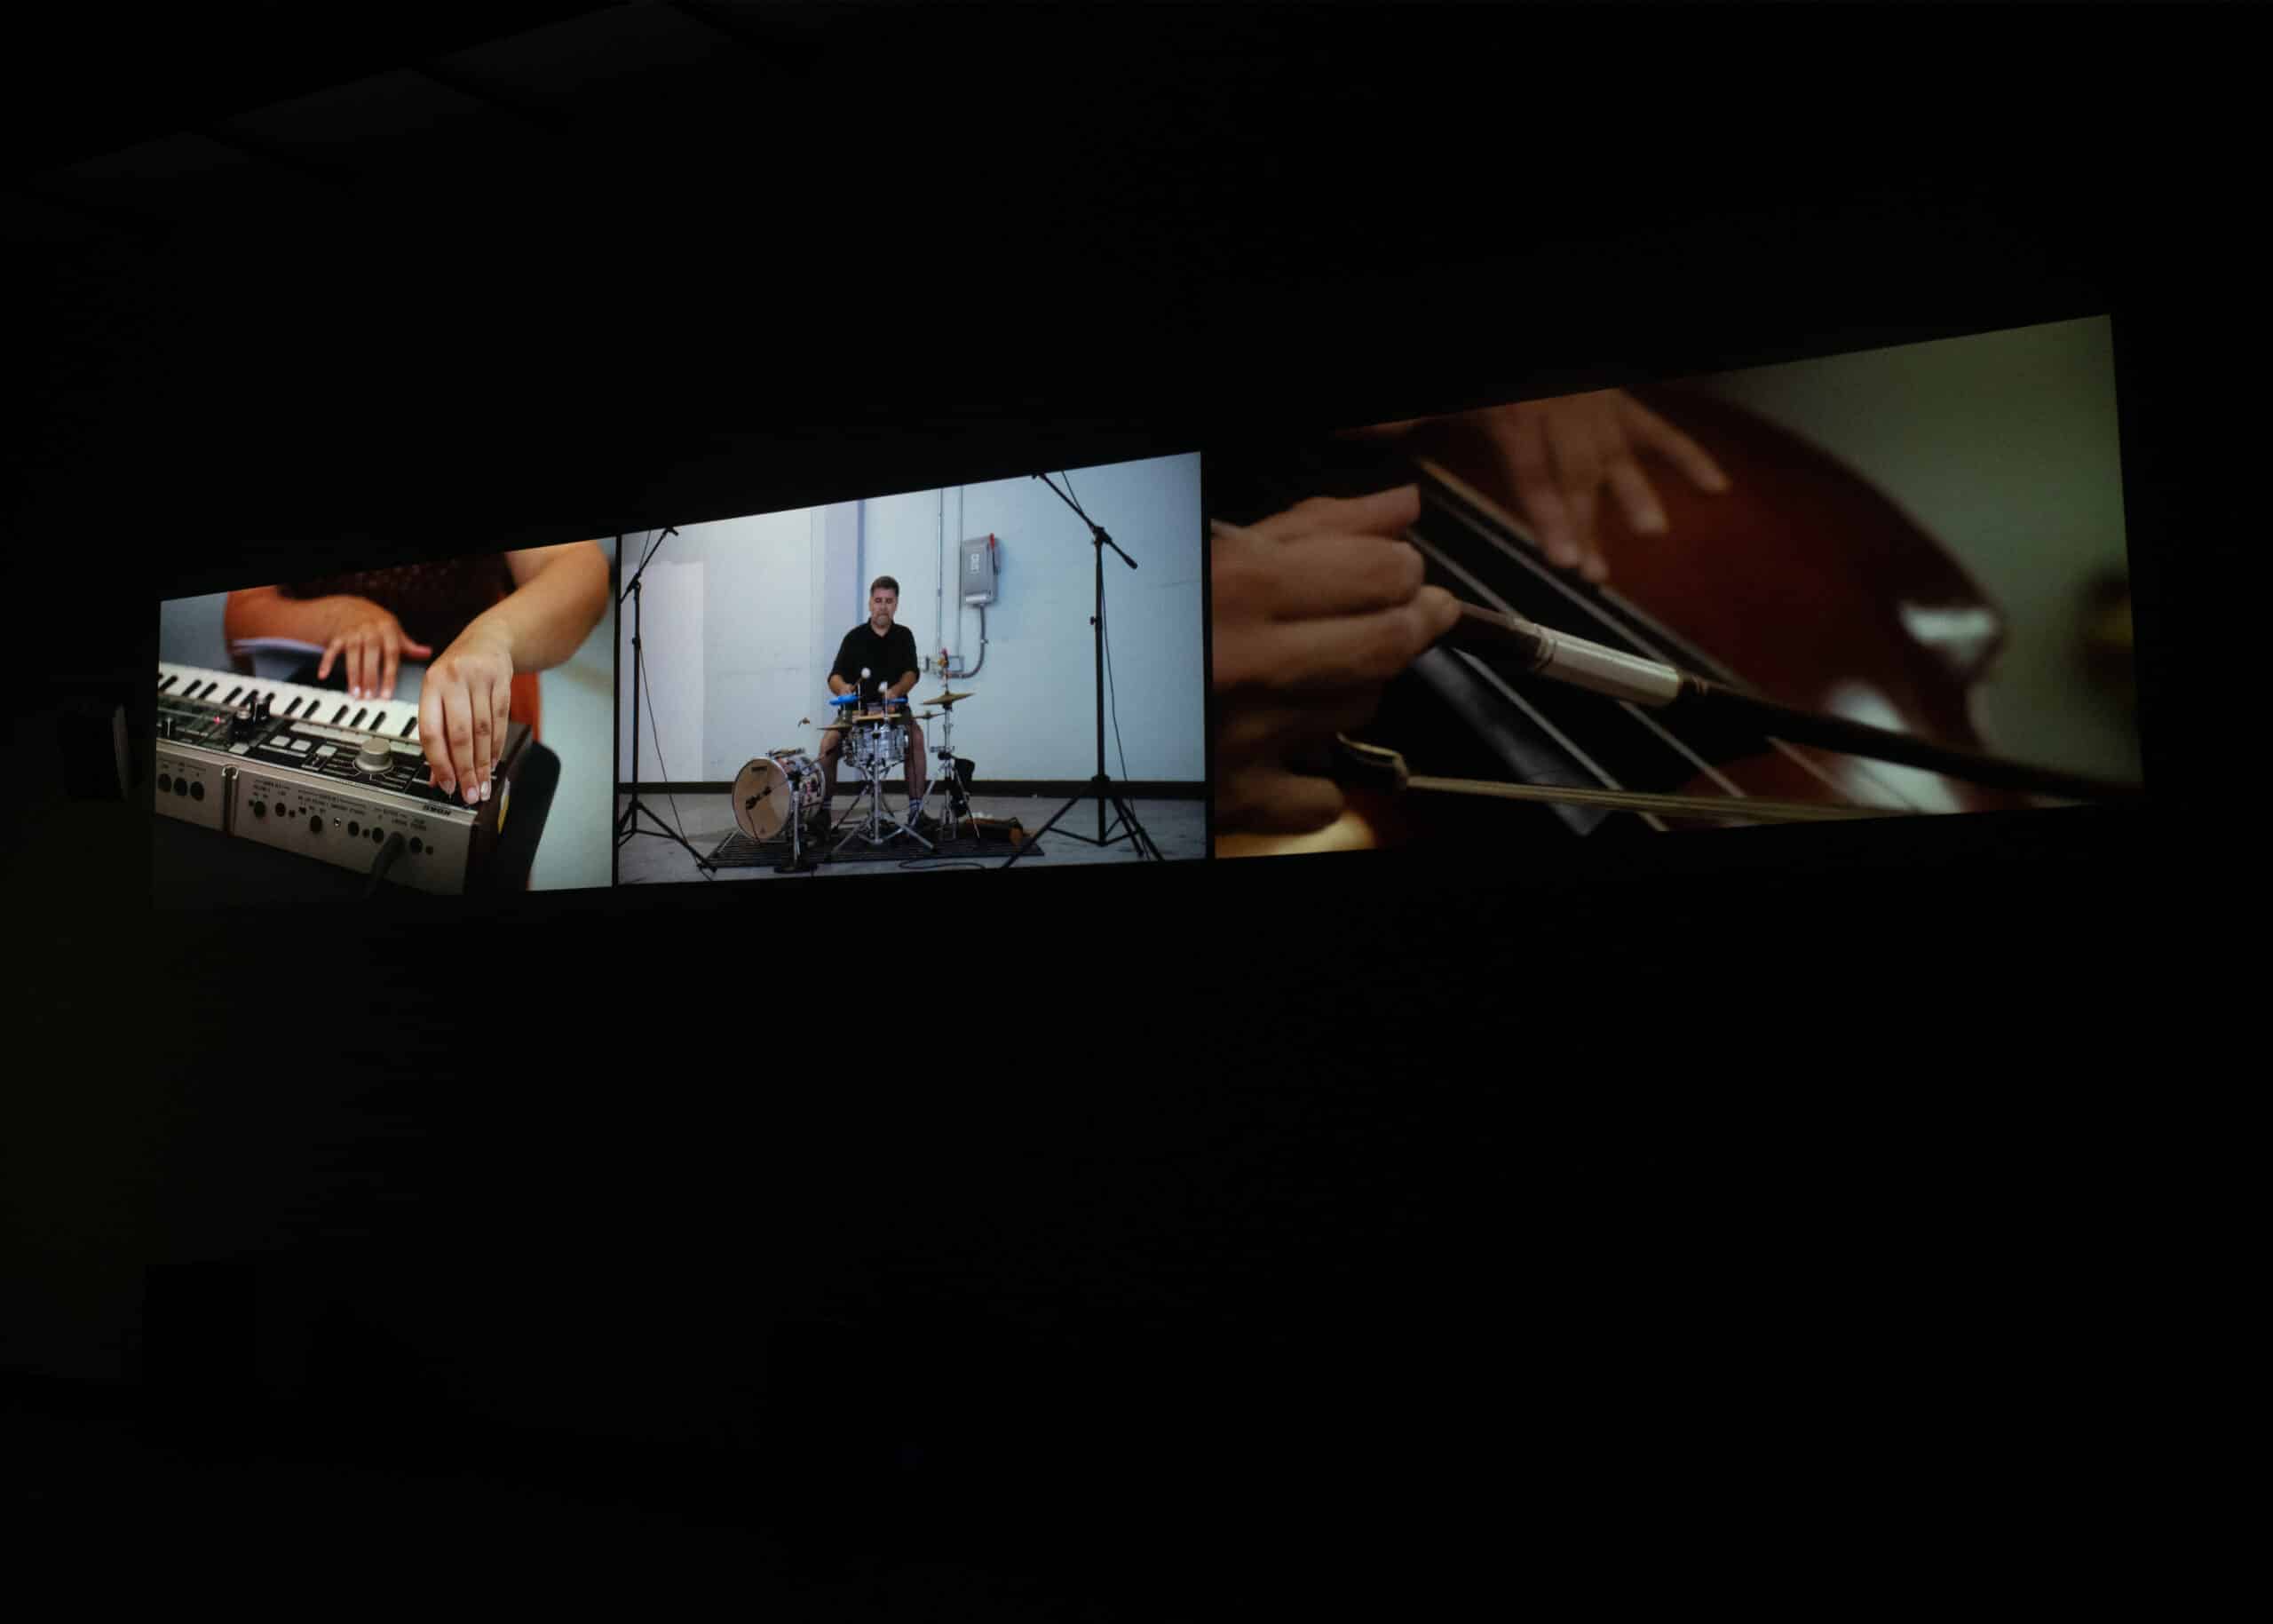 Image: Anthony Almendarez, Hello My Name Is _____, 2022, video and sound installation. Photo courtesy of the artist.